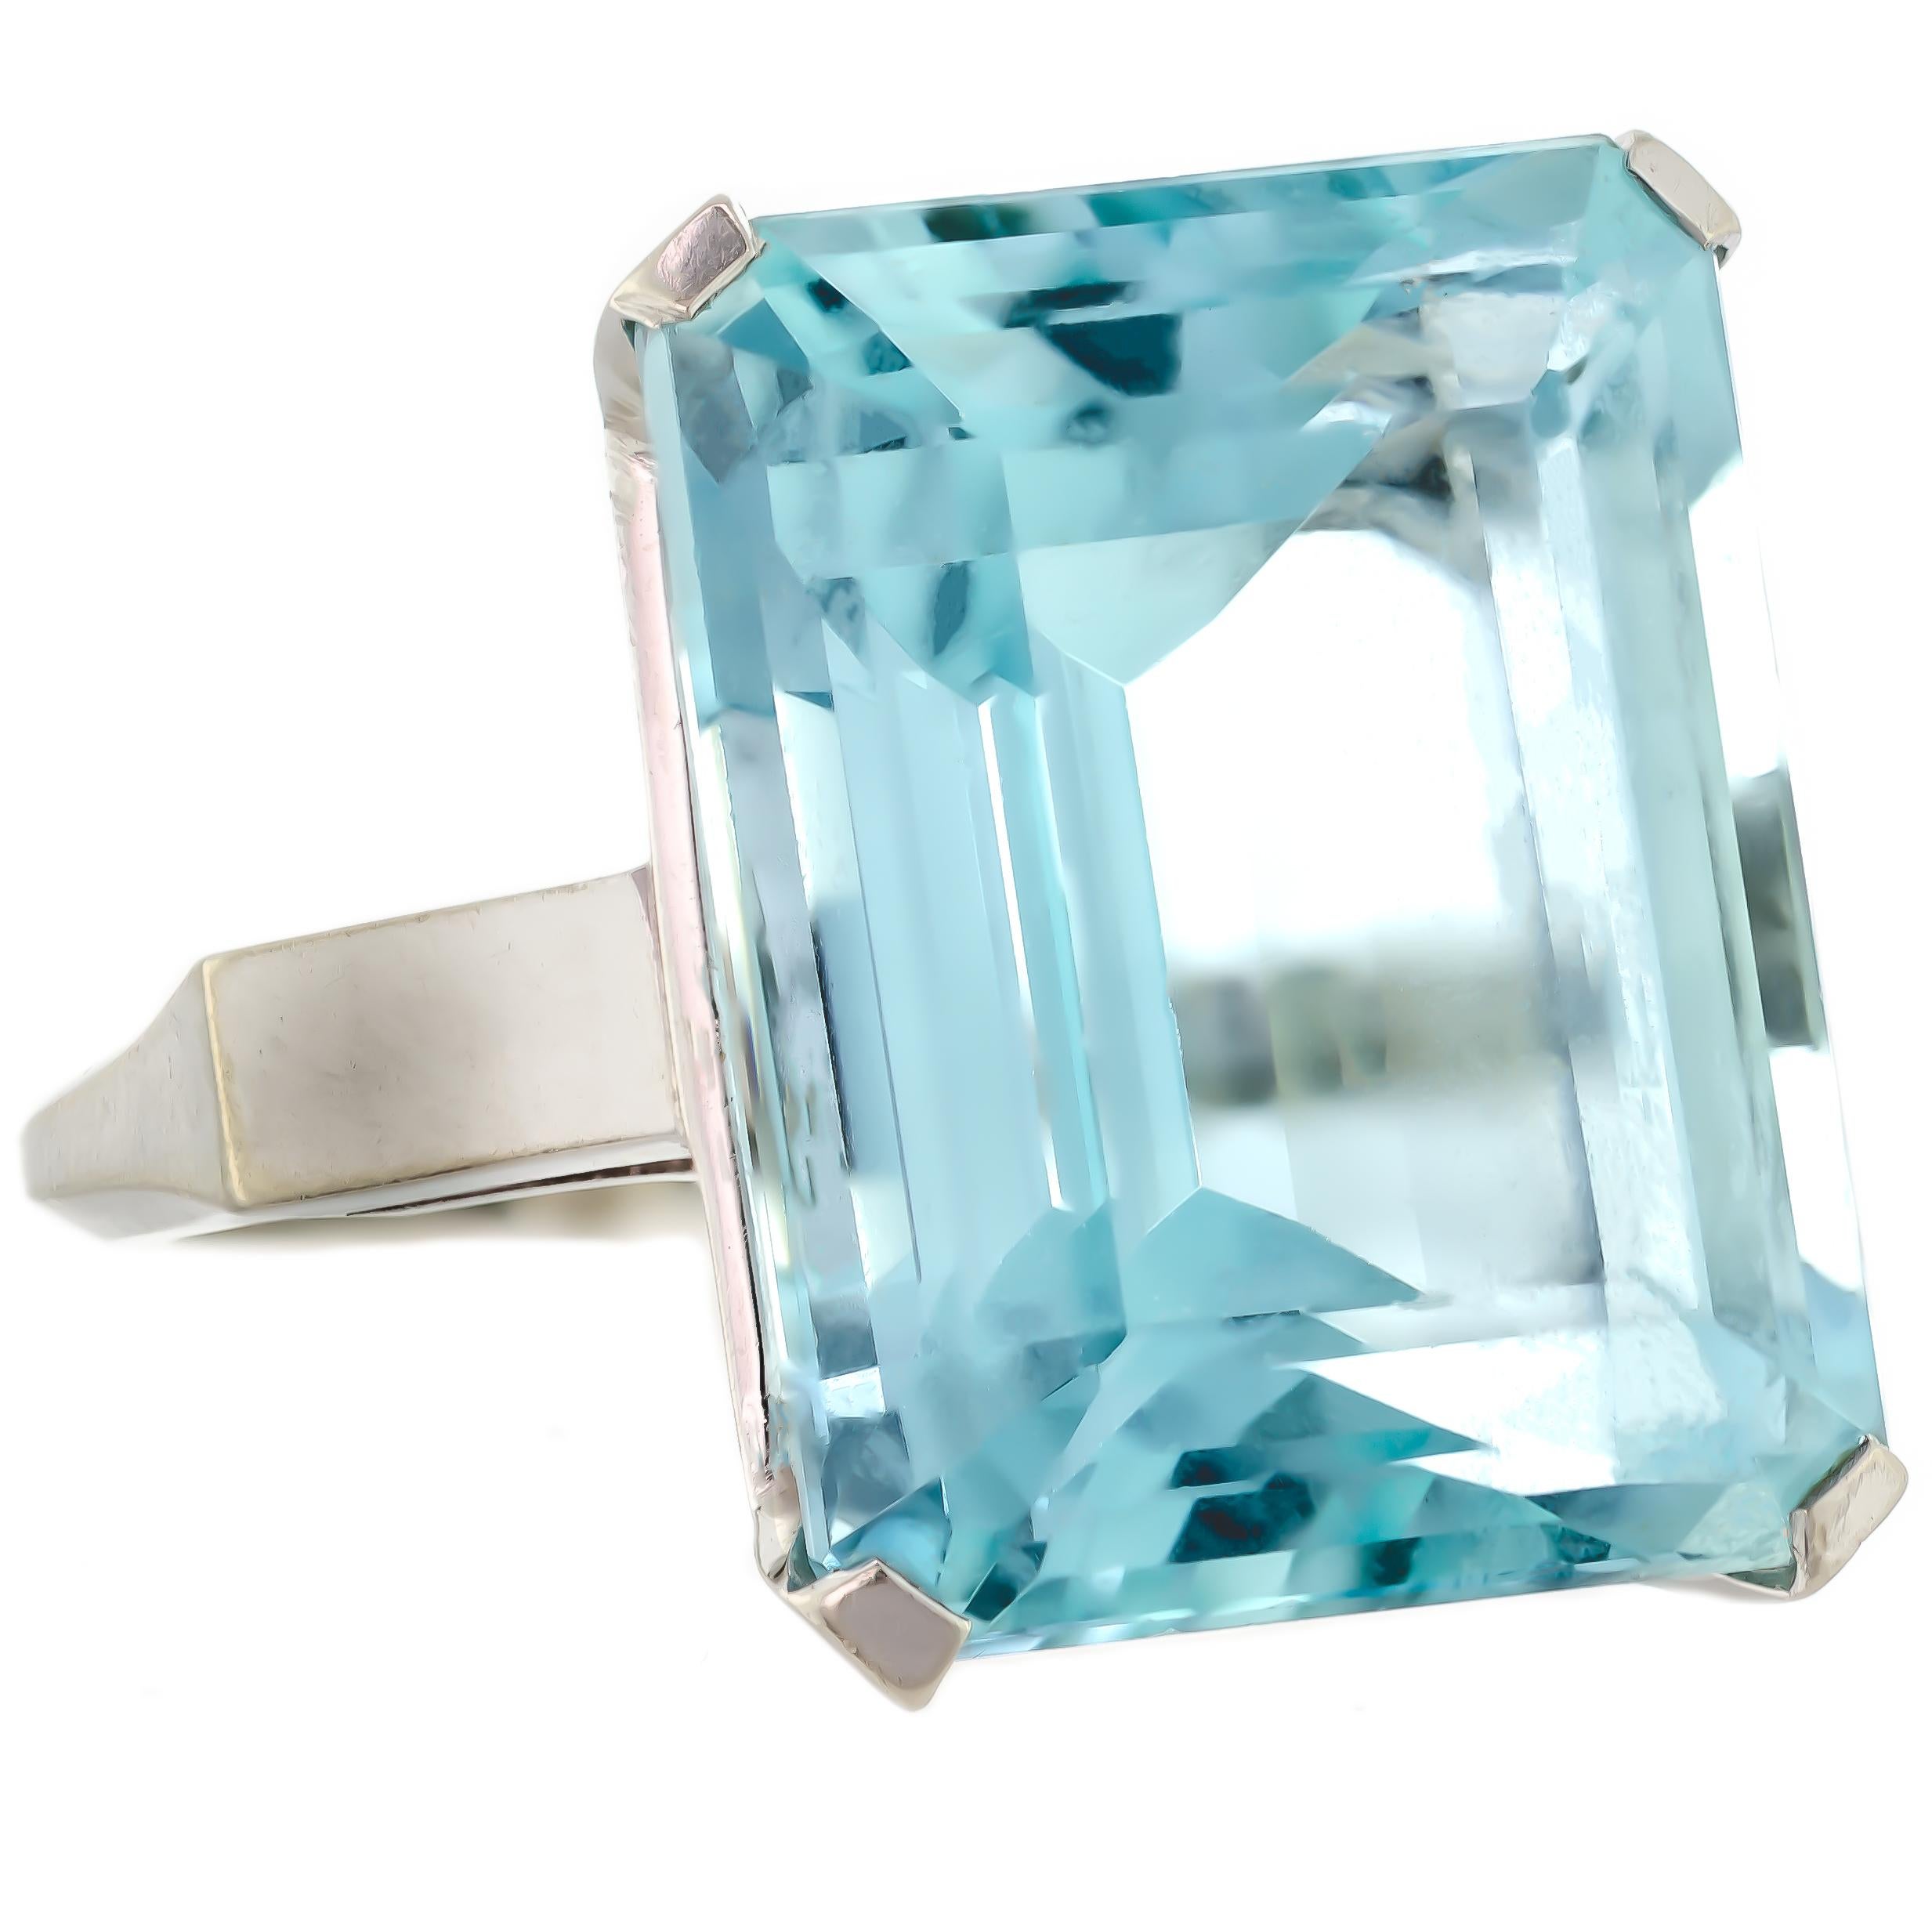 Centrally set with one (1) large emerald standard-step-cut natural aquamarine weighing approximately 19.09 carats and measuring 18.04 x 14.18 x 10.16mm. This medium-light greenish-blue aquamarine has the slightest ting of gray and pairs perfectly